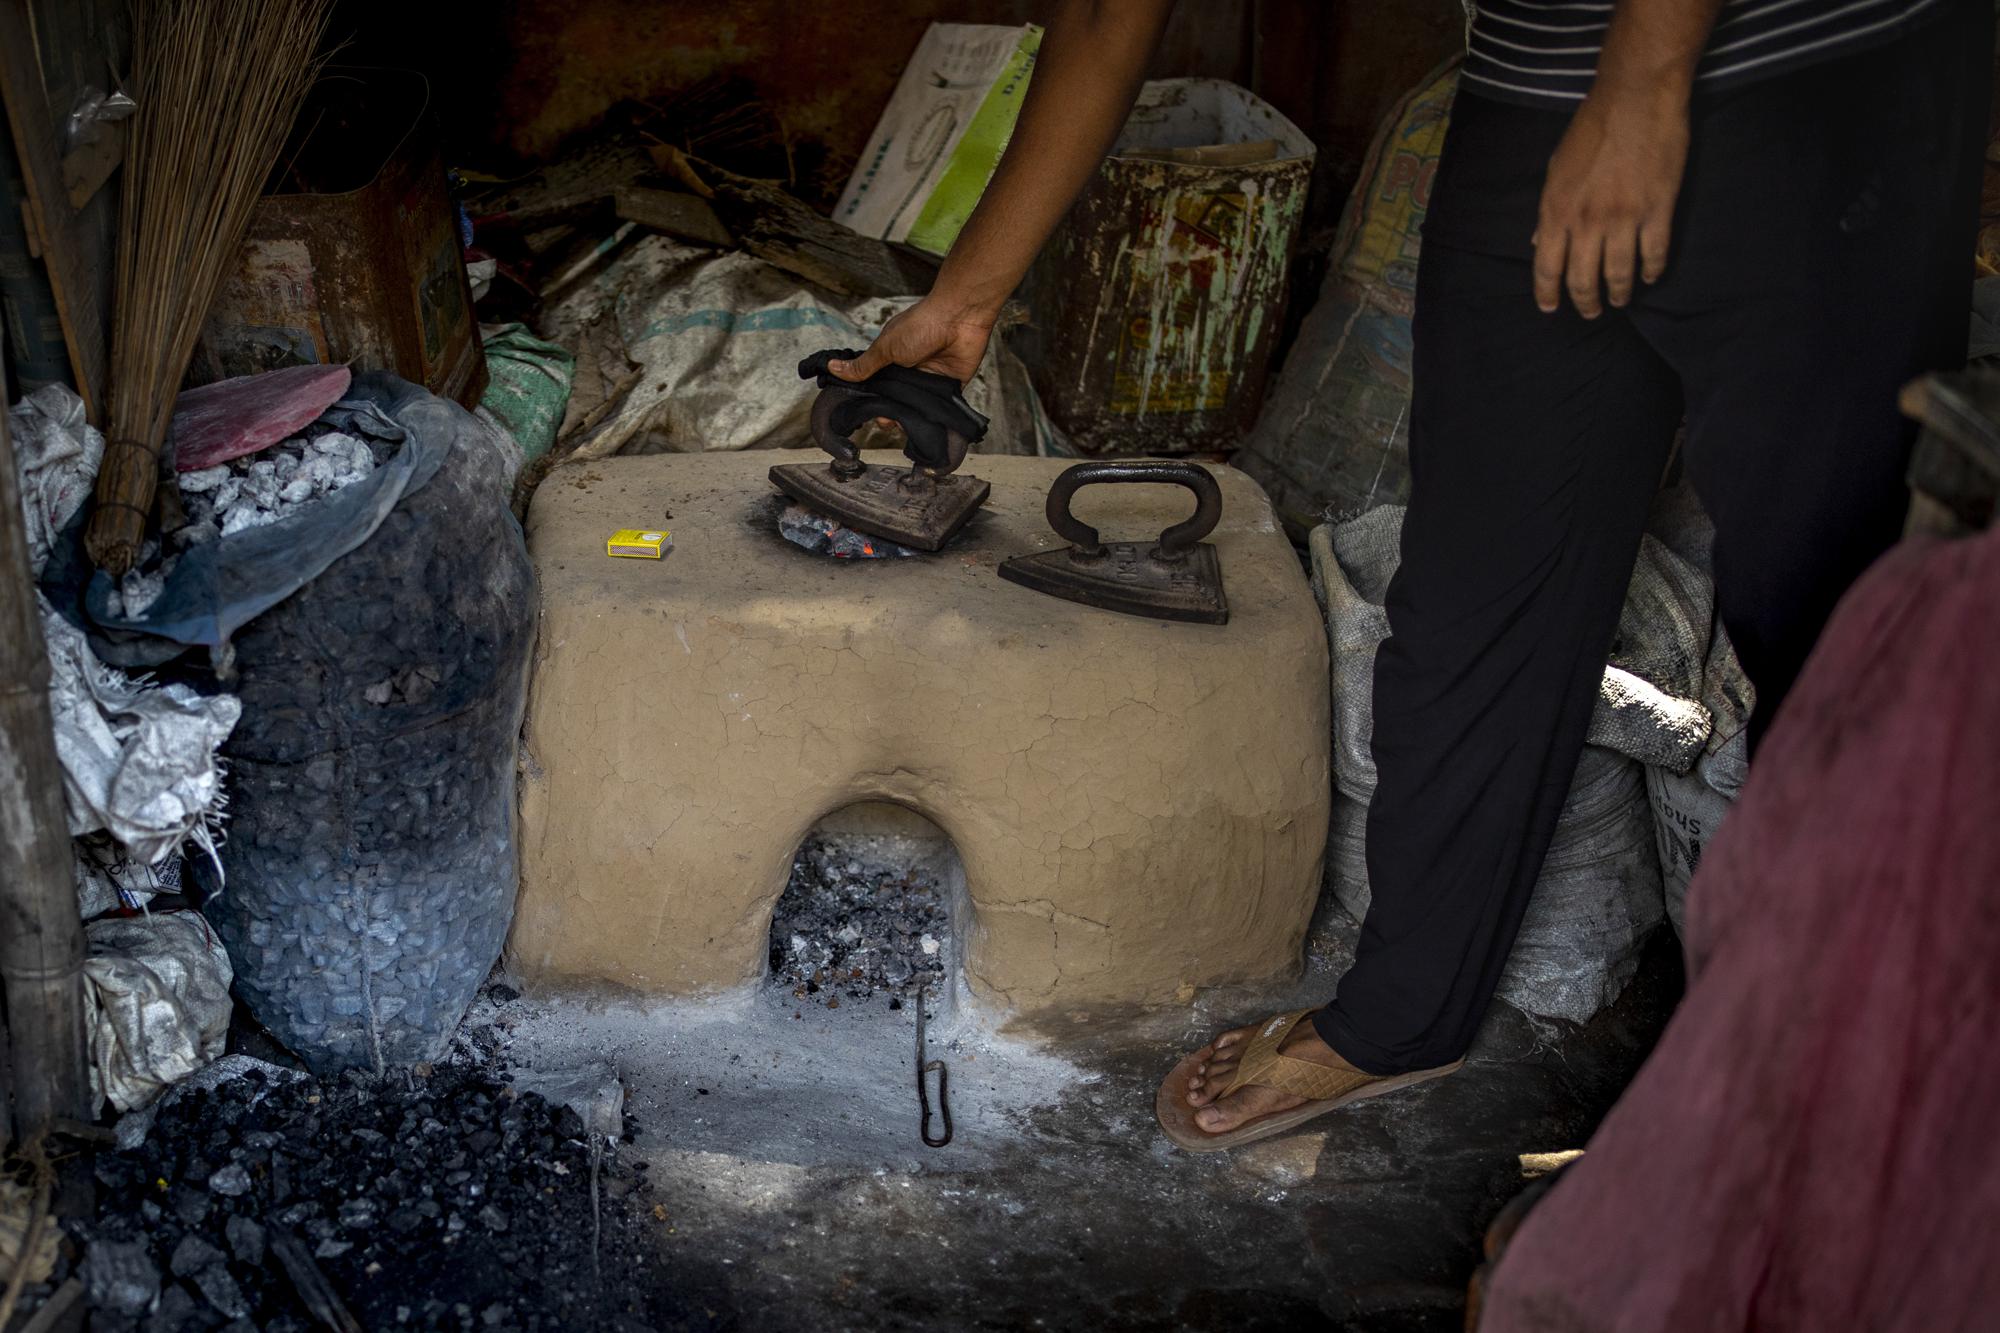 A washerman uses coal to heat up iron in Dhanbad, an eastern Indian city in Jharkhand state, Saturday, Sept. 25, 2021. A 2021 Indian government study found that Jharkhand state -- among the poorest in India and the state with the nation’s largest coal reserves -- is also the most vulnerable Indian state to climate change. Efforts to fight climate change are being held back in part because coal, the biggest single source of climate-changing gases, provides cheap electricity and supports millions of jobs. It's one of the dilemmas facing world leaders gathered in Glasgow, Scotland this week in an attempt to stave off the worst effects of climate change. (AP Photo/Altaf Qadri)